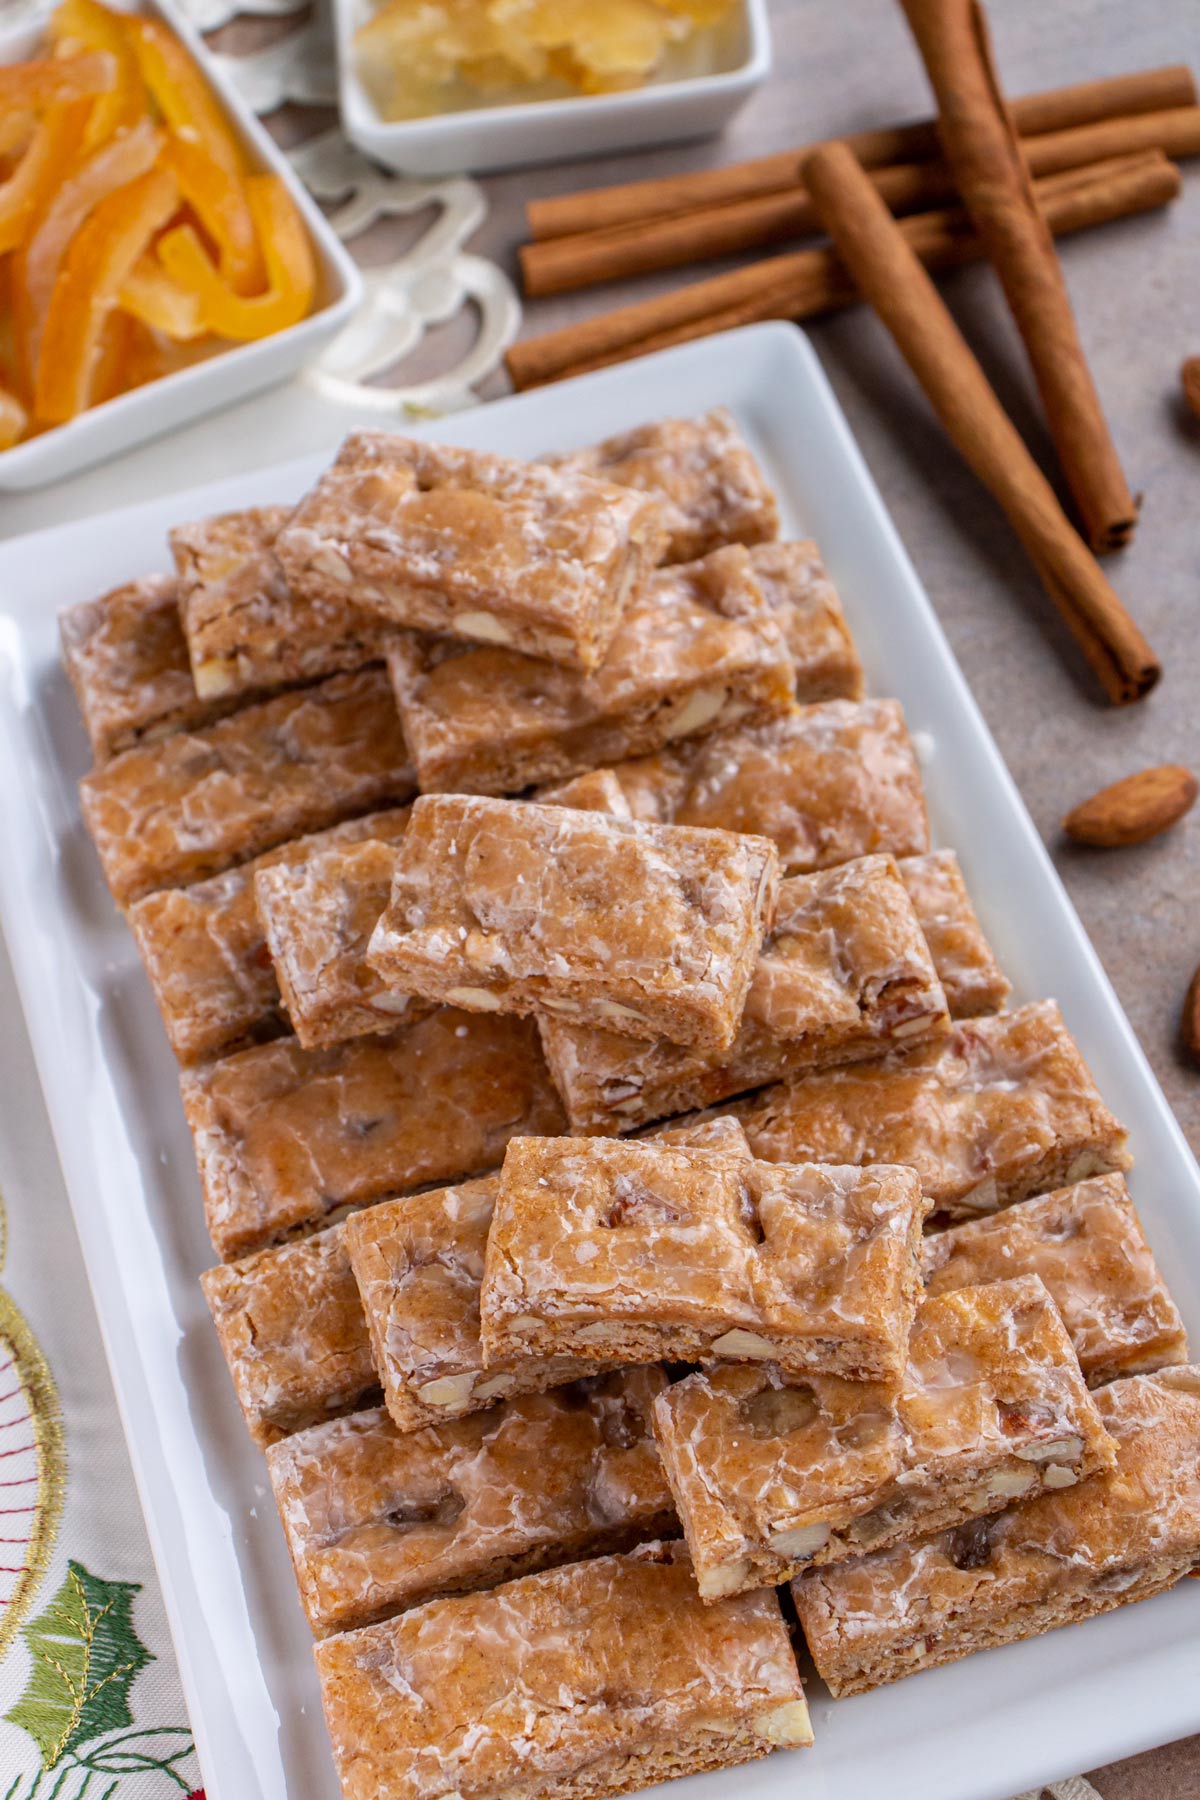 Glazed rectangular cookie bars on a white rectangular plate with candied citrus peel and cinnamon sticks.